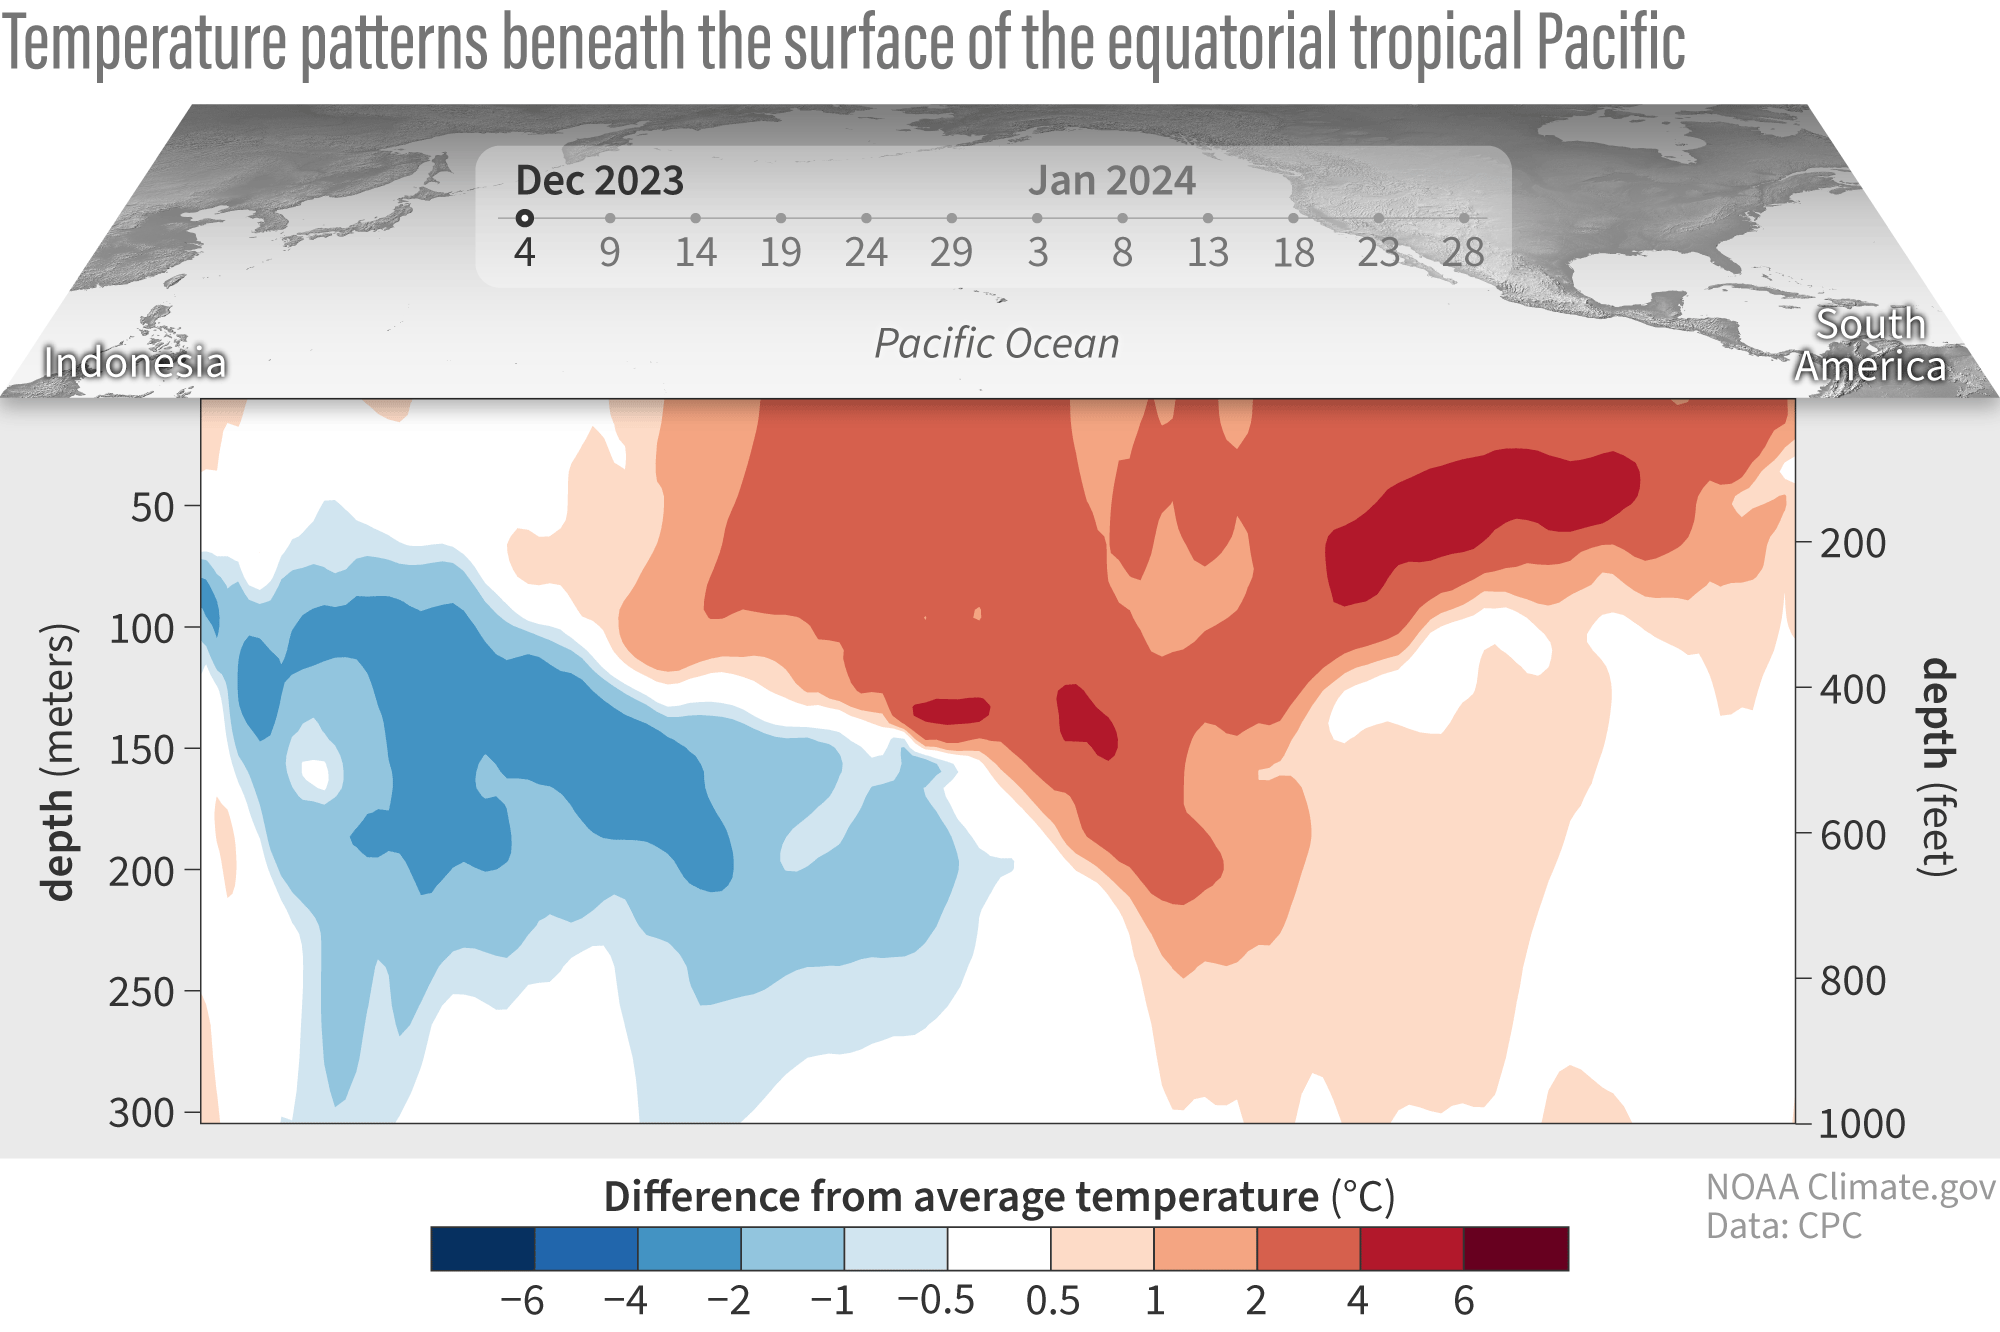 Temperature anomalies at depth in the Pacific ocean from late 2023 to January 2024. Blue colors spread eastward at depth representing below-average temperature. Red areas representing above-average temperature remain closer to the surface across the central/eastern Pacific ocean.